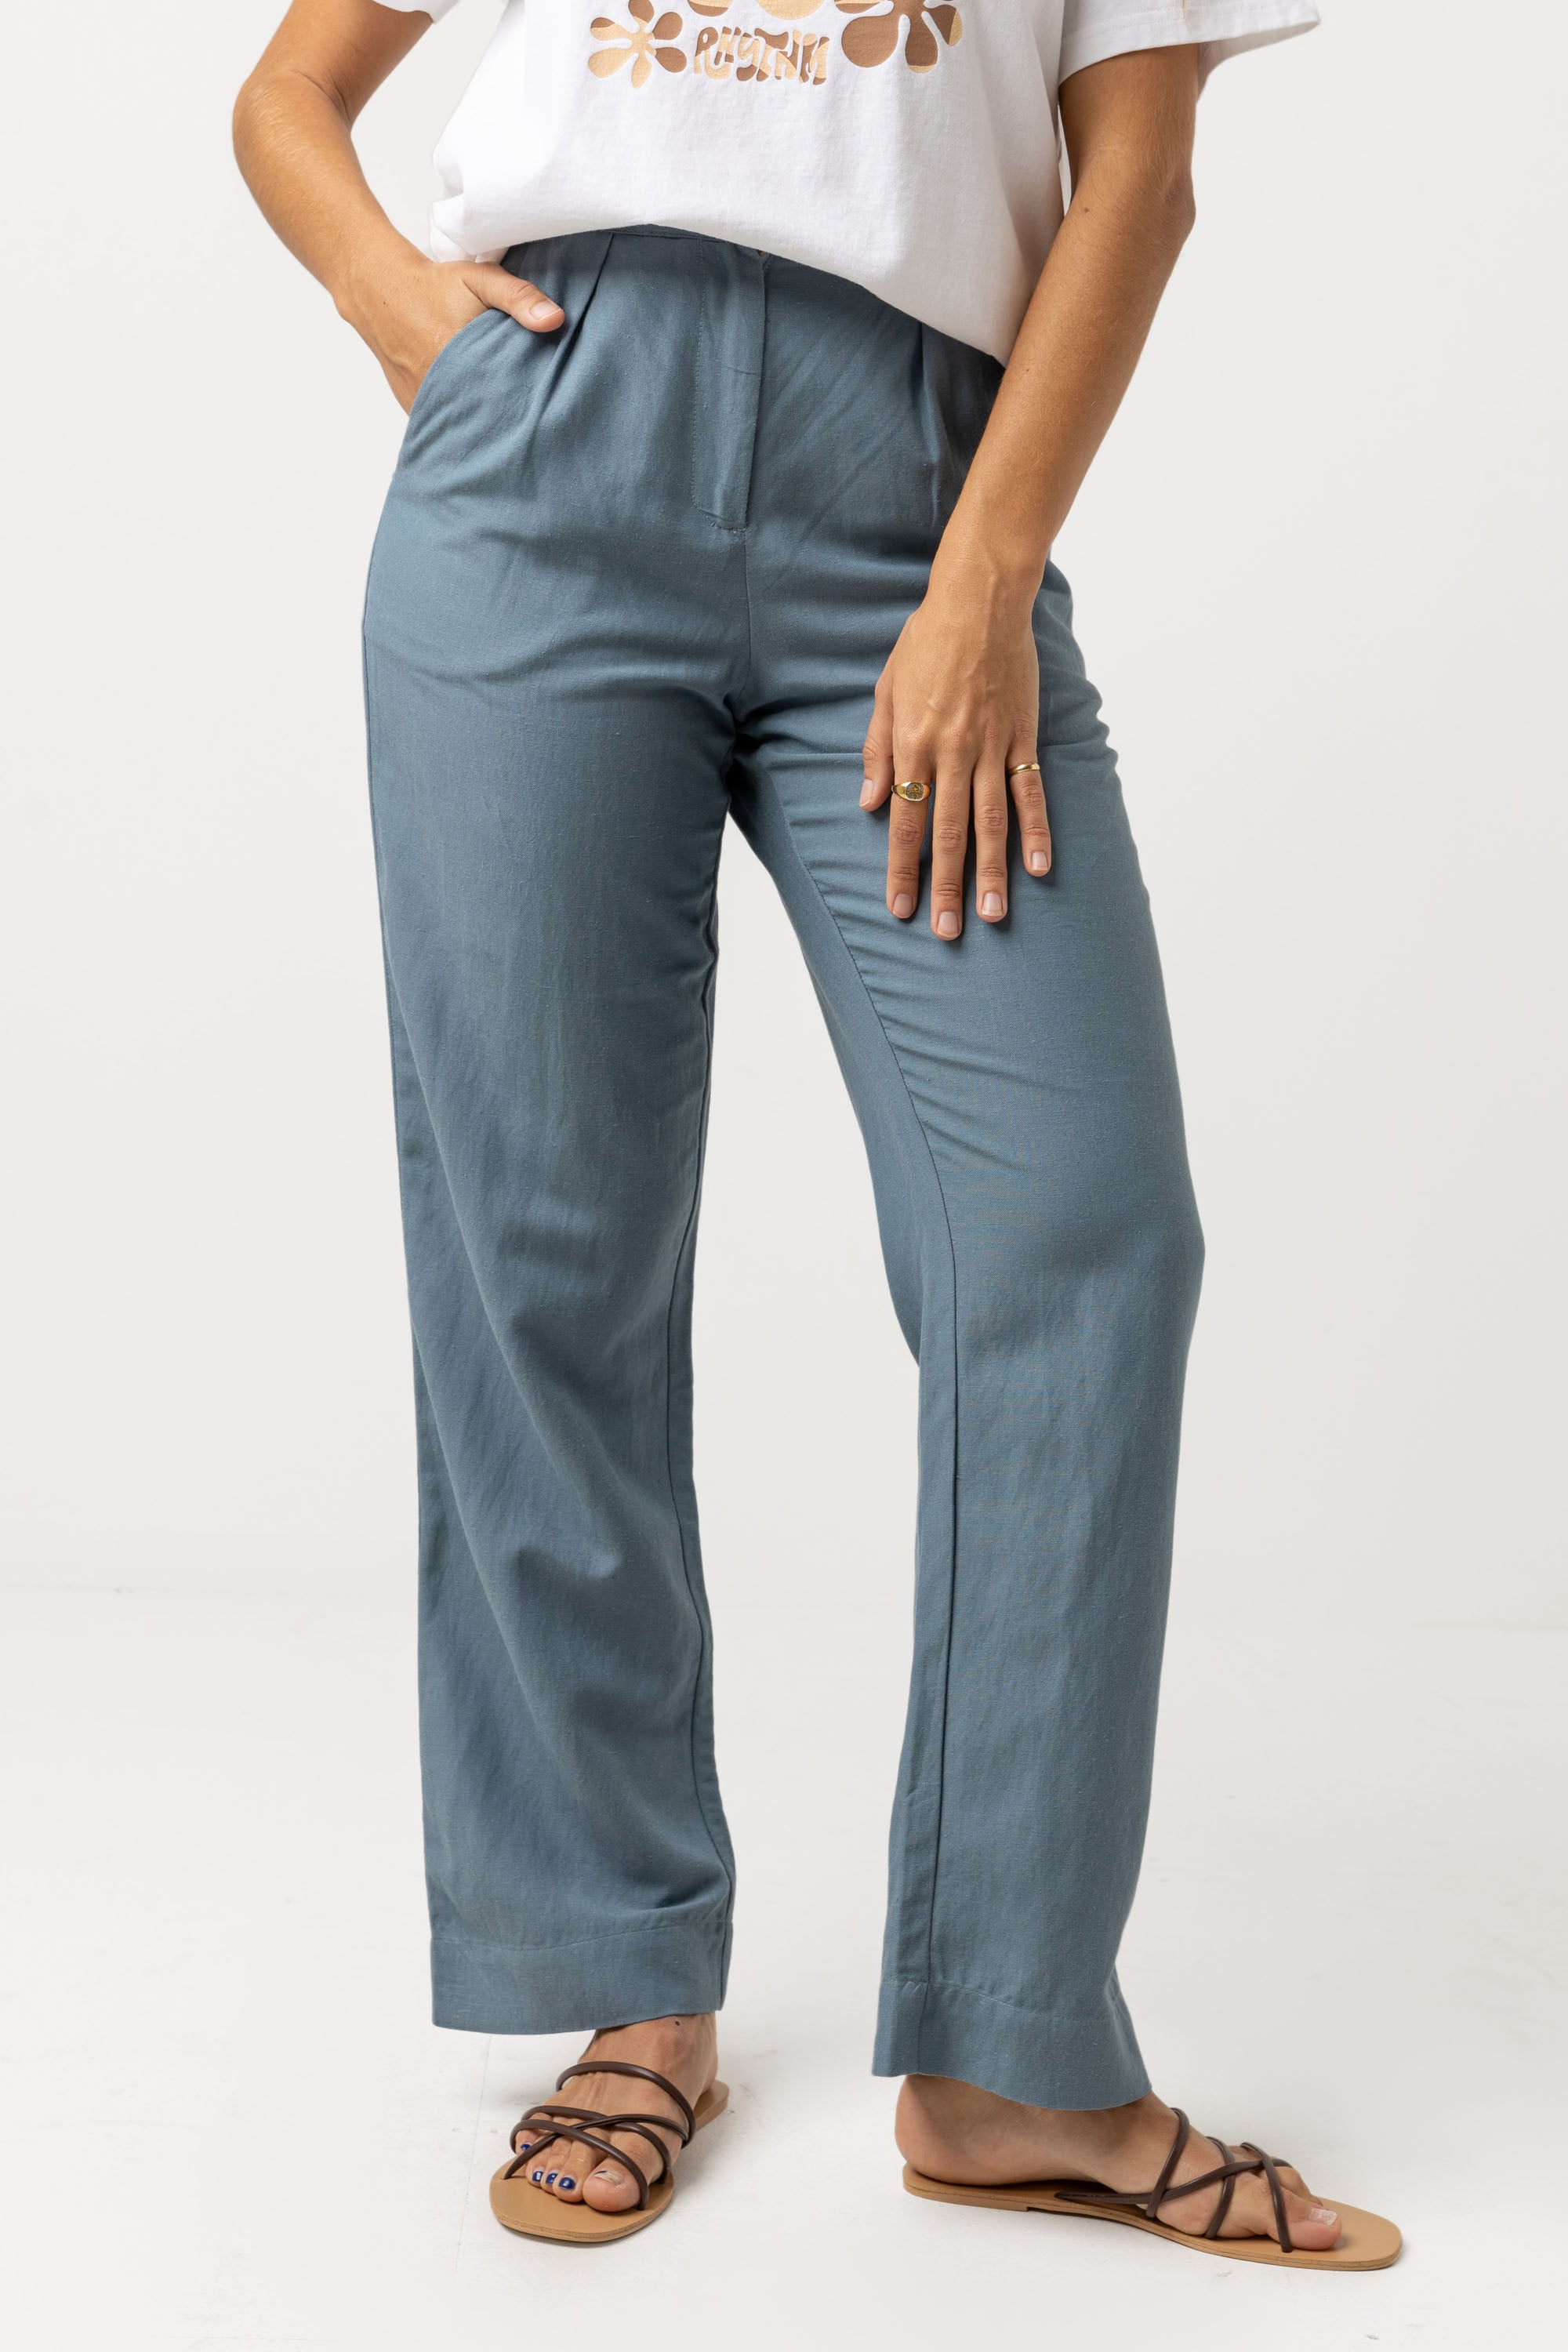 Retreat Pant- Dusted Teal